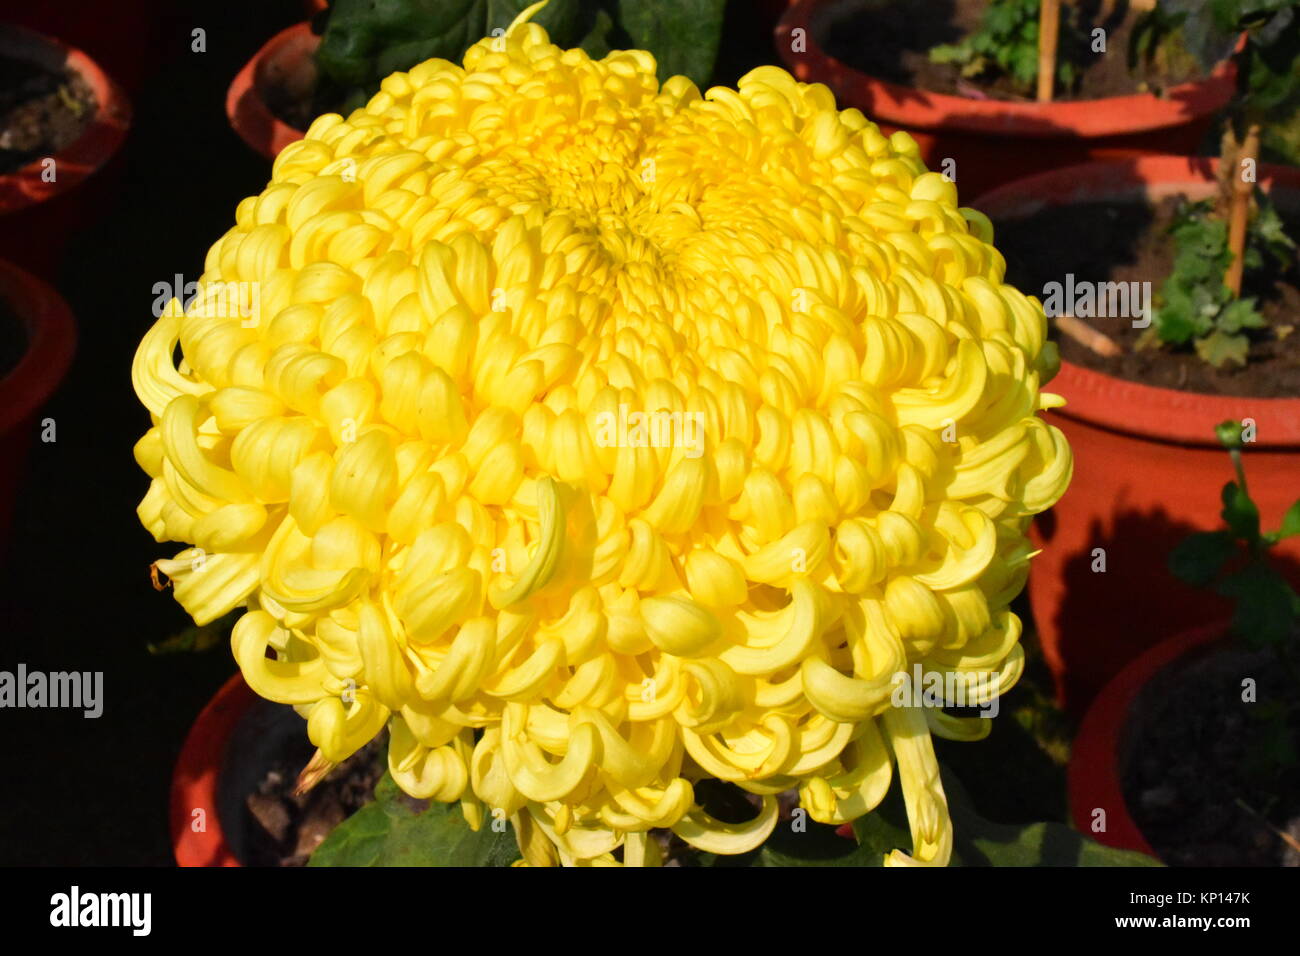 A beautiful yellow chrysanthemum in full bloom at the Annual Chrysanthemum show at Terraced Garden, Chandigarh, India. Stock Photo